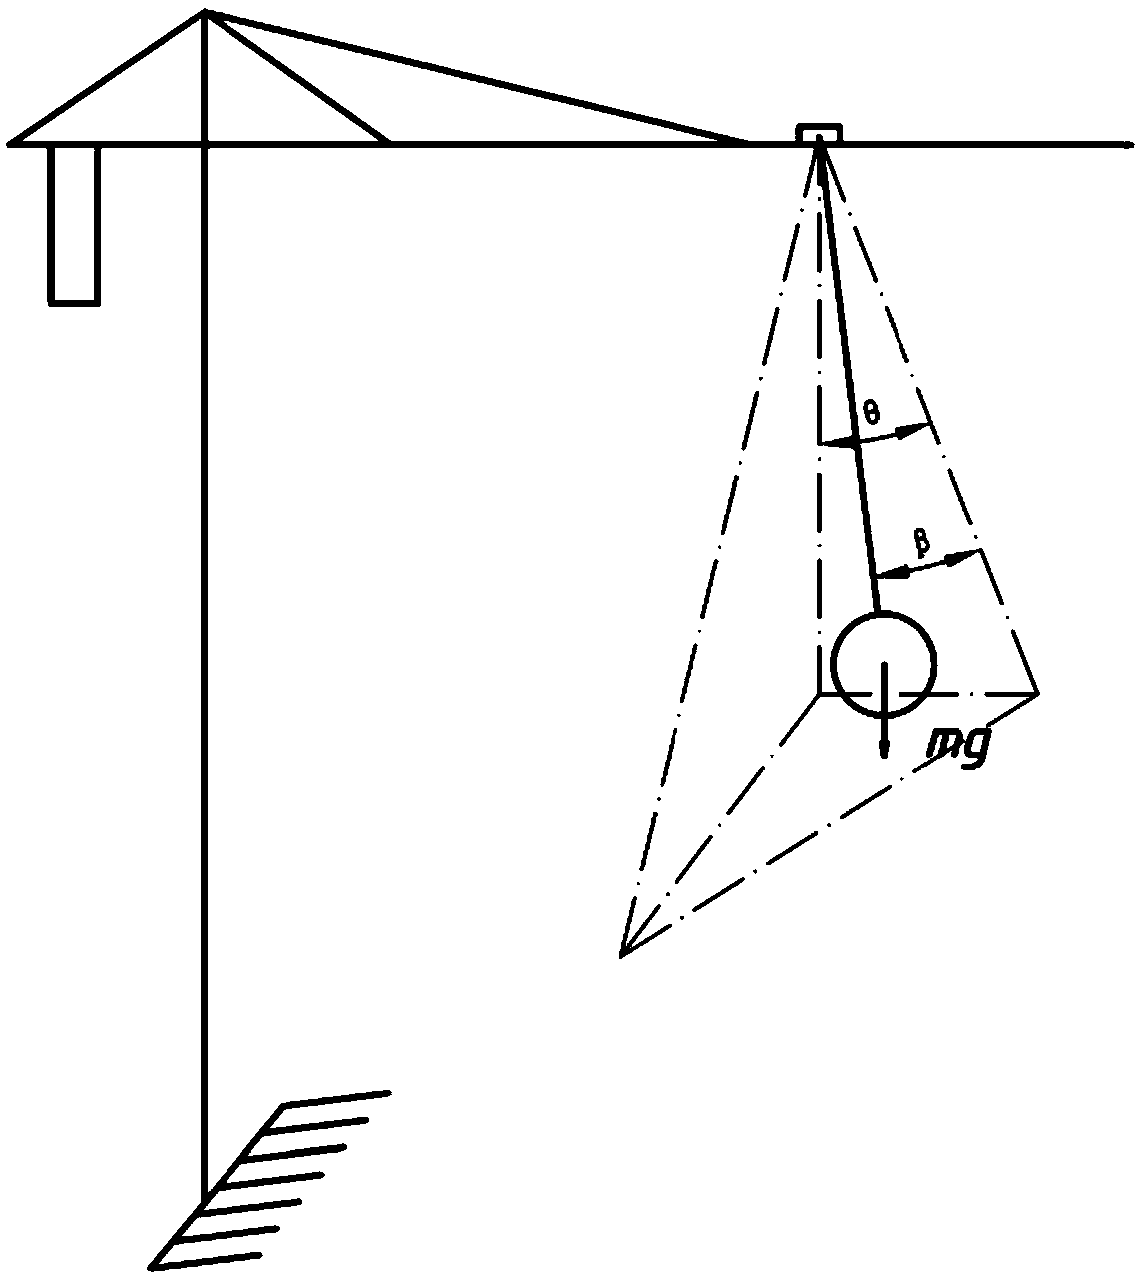 A control method for anti-sway operation of a tower crane